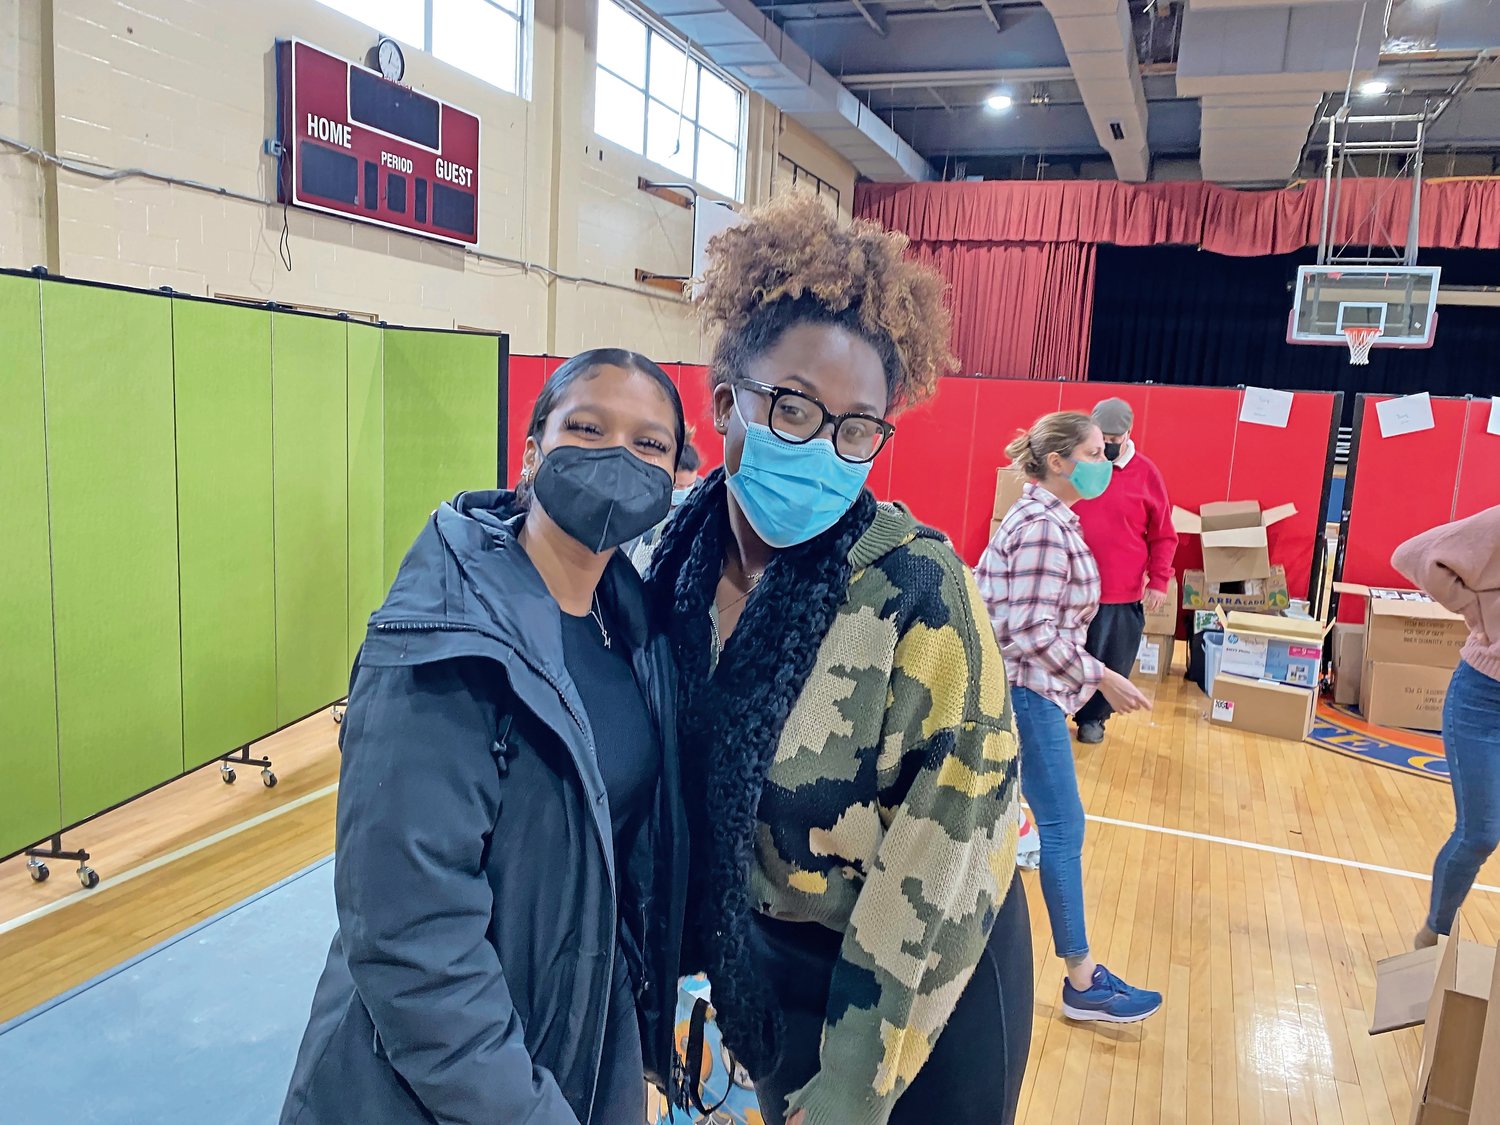 Rock and Wrap It Up volunteers Mylana O’Reggio and Taylour Peters at the Five Towns Community Center on Dec. 24.